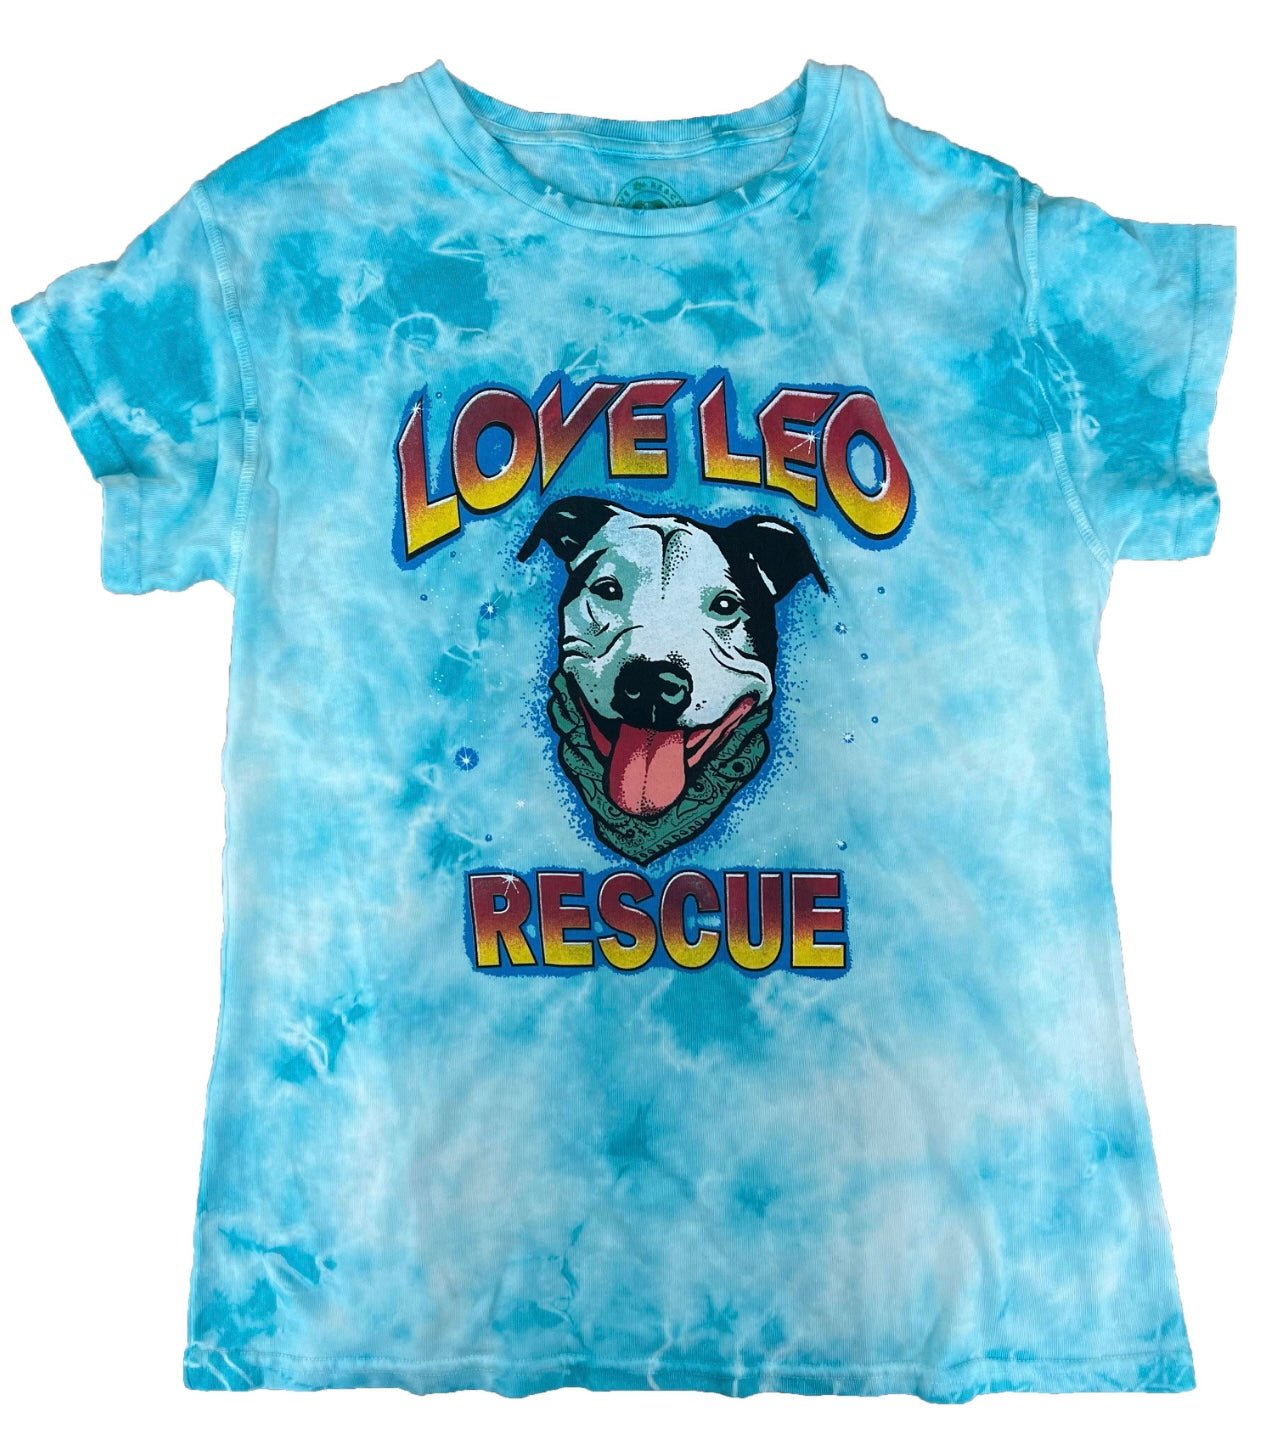 Limited edition tie-dye T-shirt – Love Leo Rescue